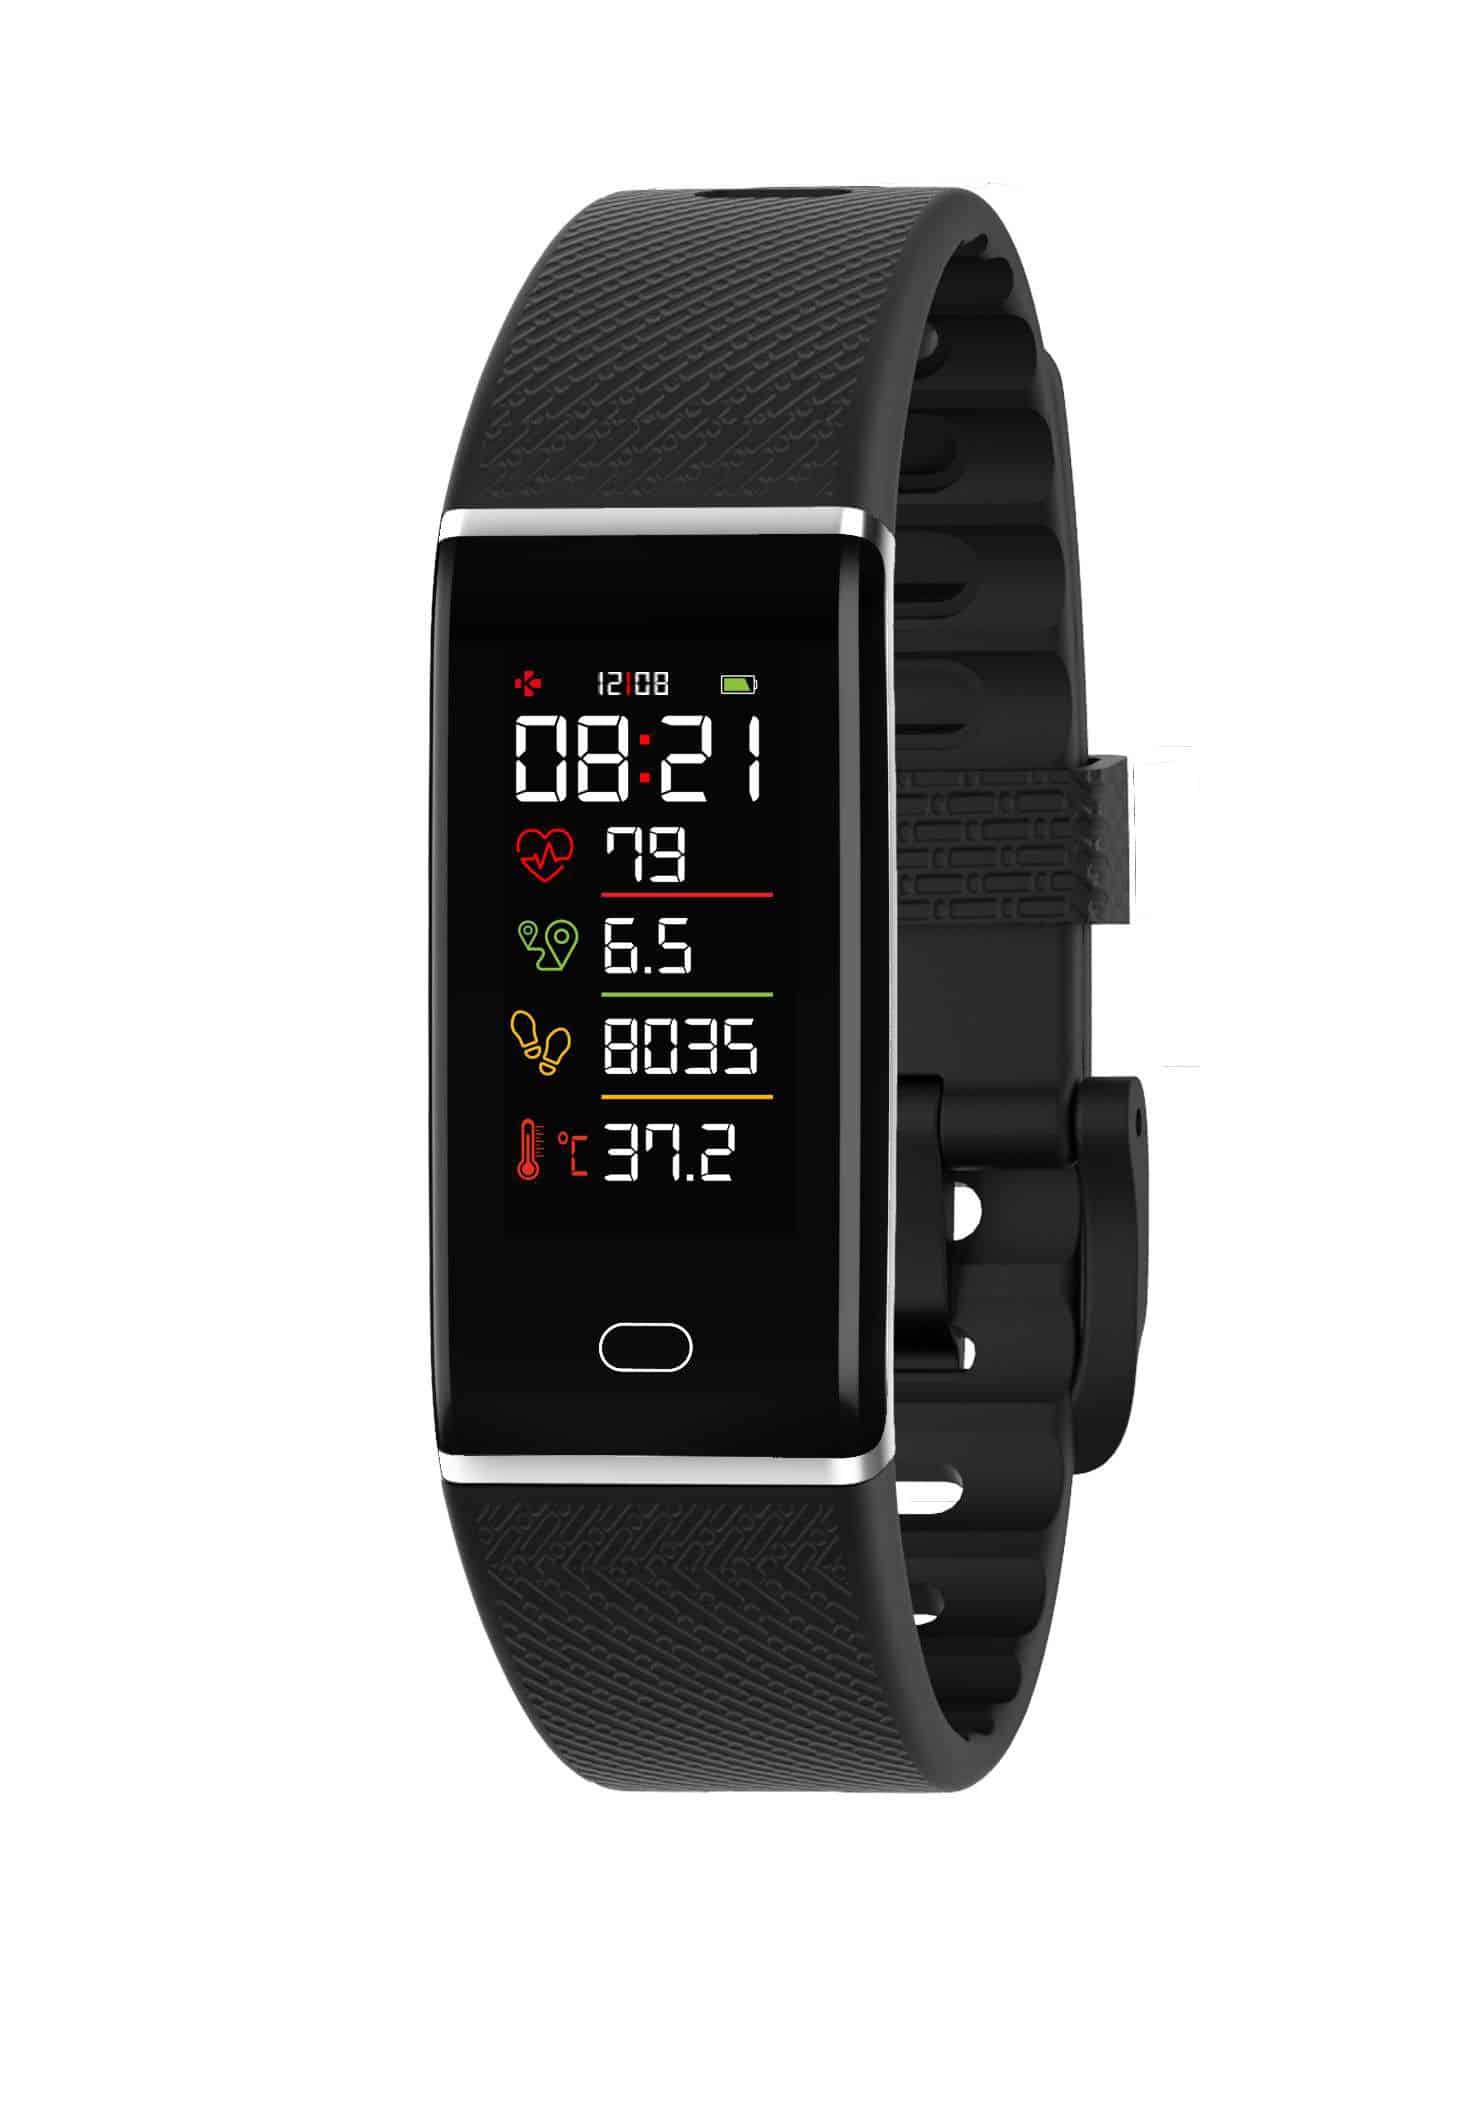 MyKronoz ZeTrack + activity tracker with body temperature and heart rate